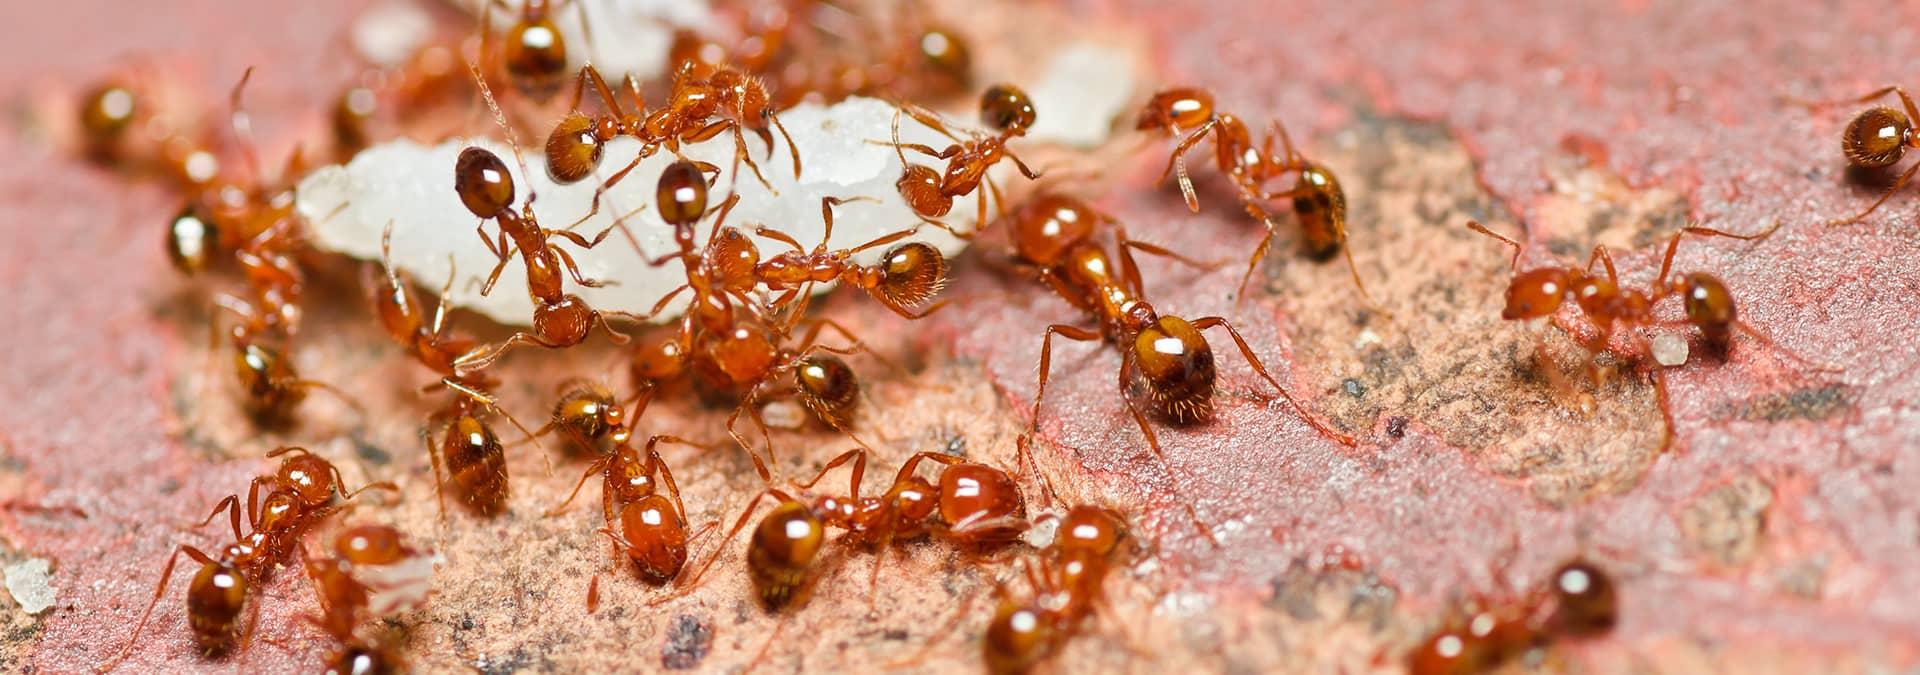 many fire ants outside a home in saint johns florida